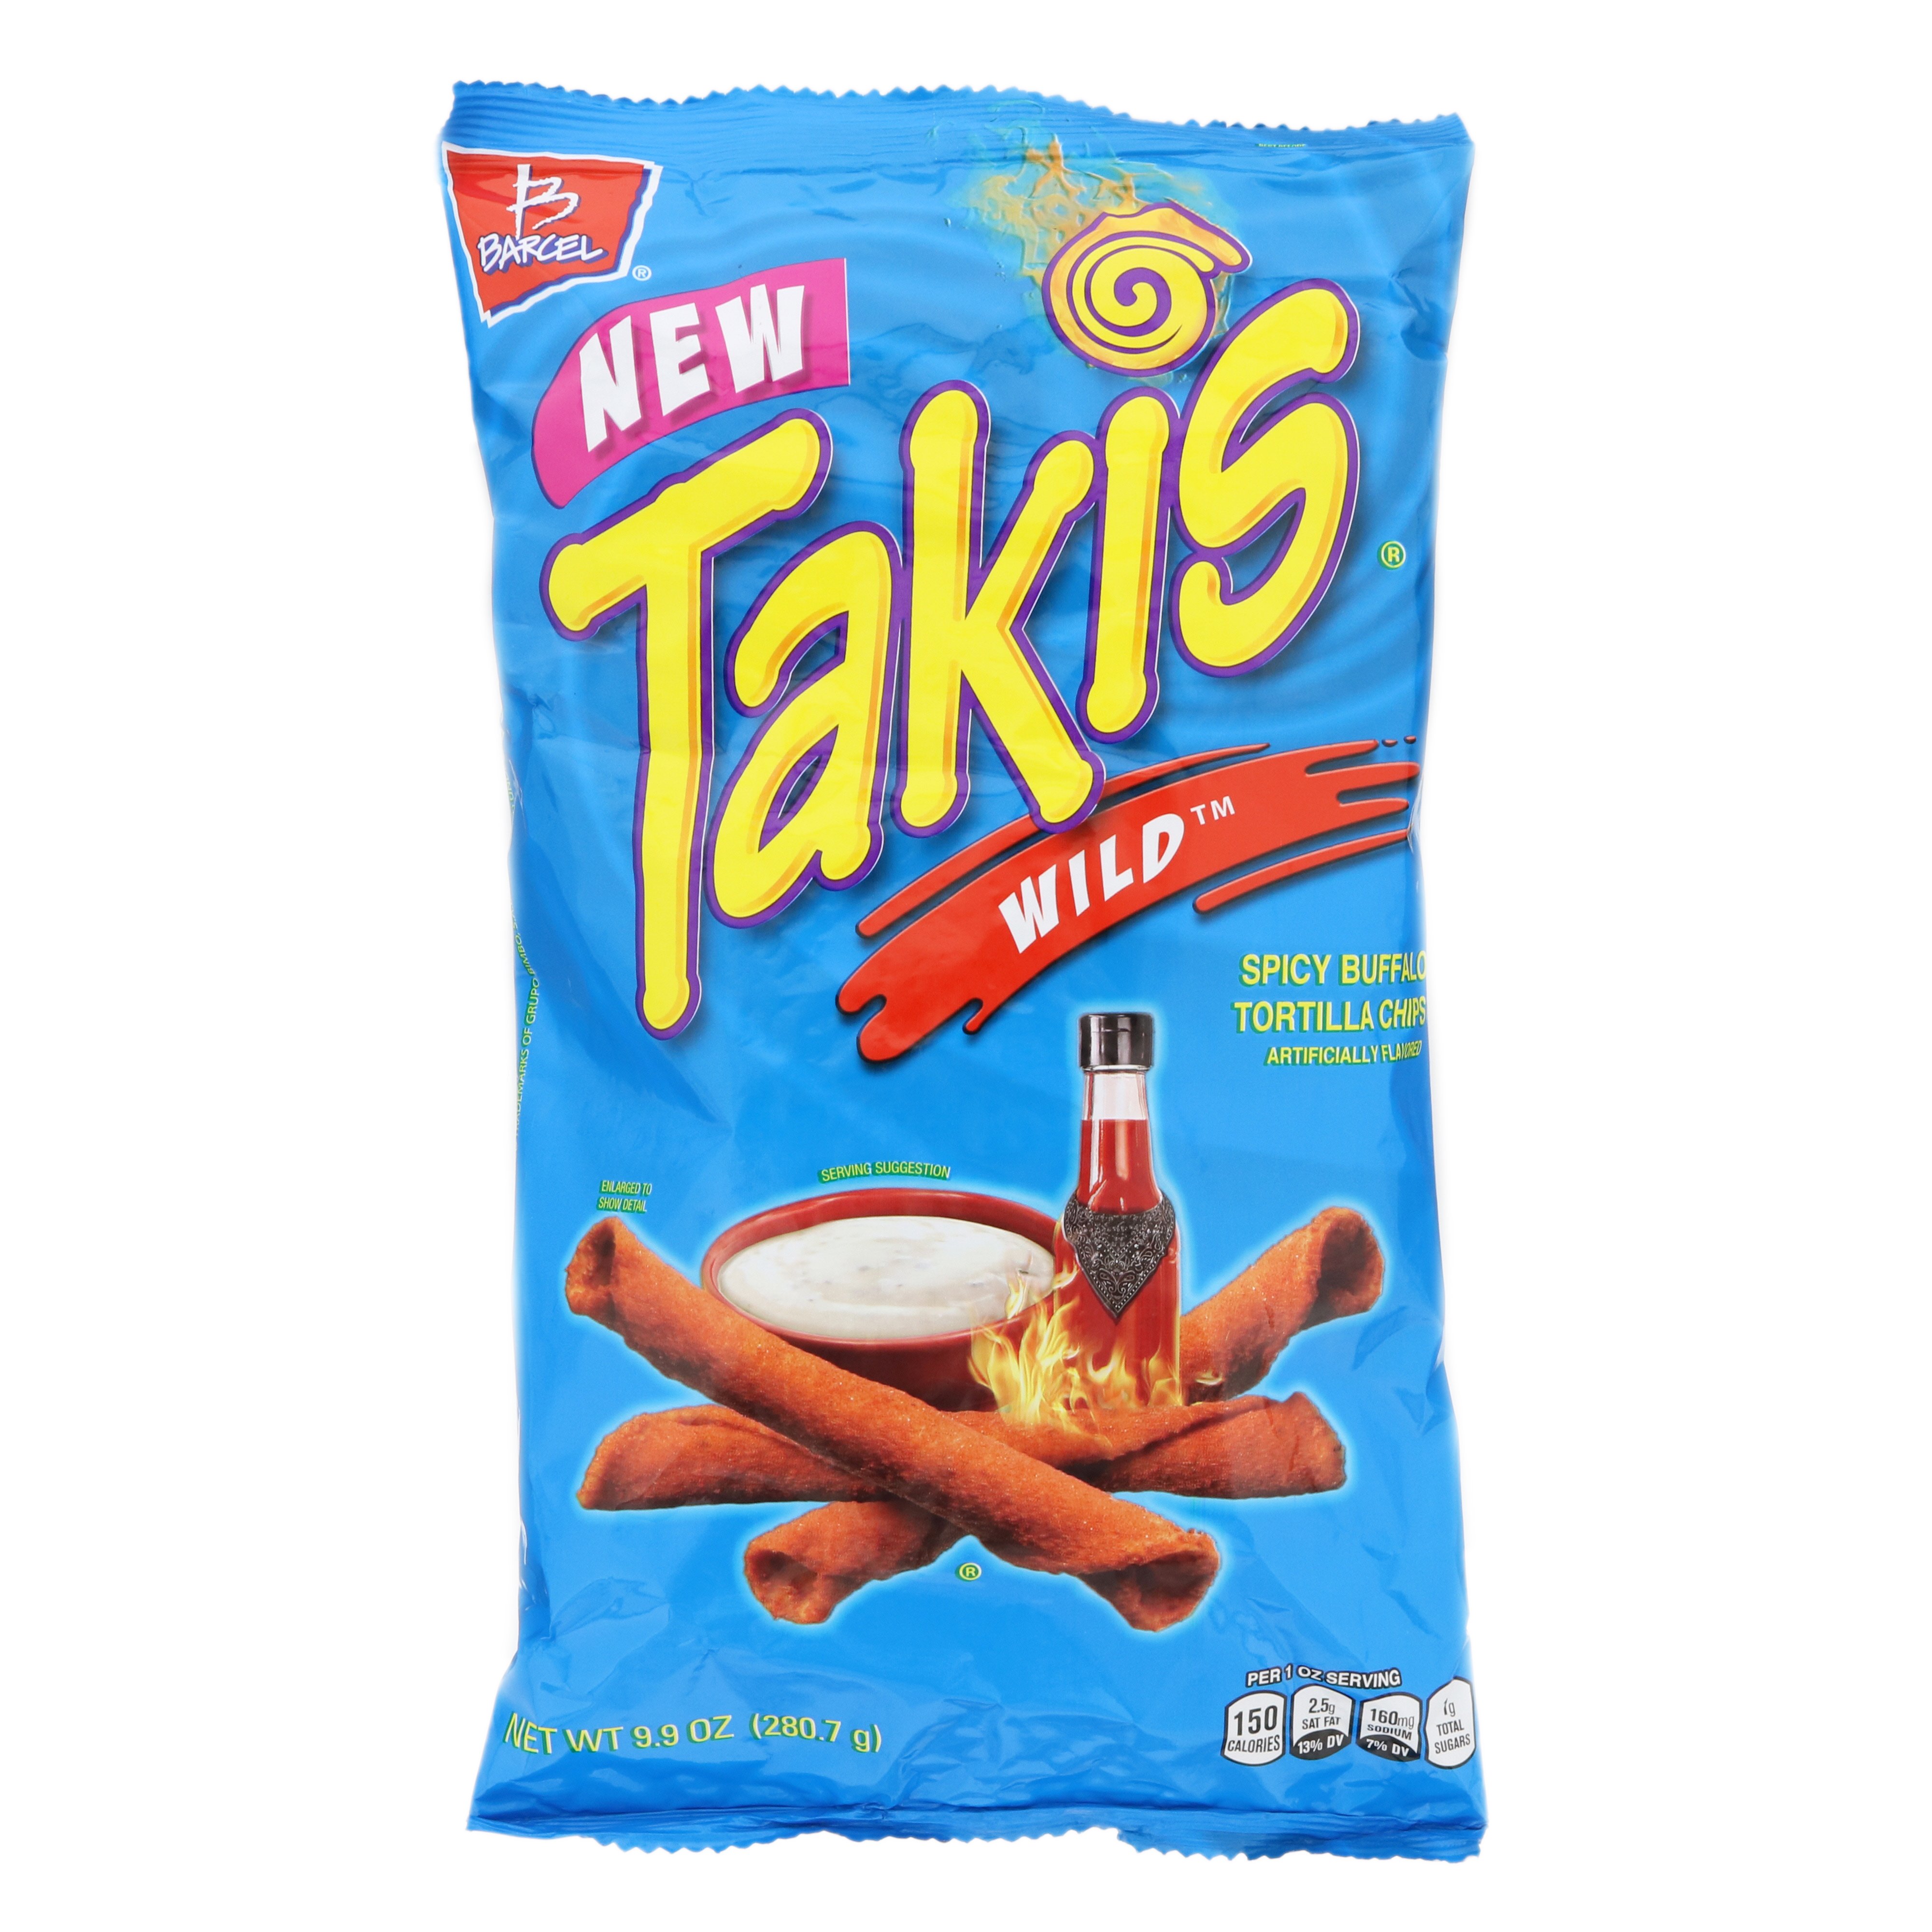 Barcel Takis Wild Spicy Buffalo Tortilla Chips Shop Chips At H E B